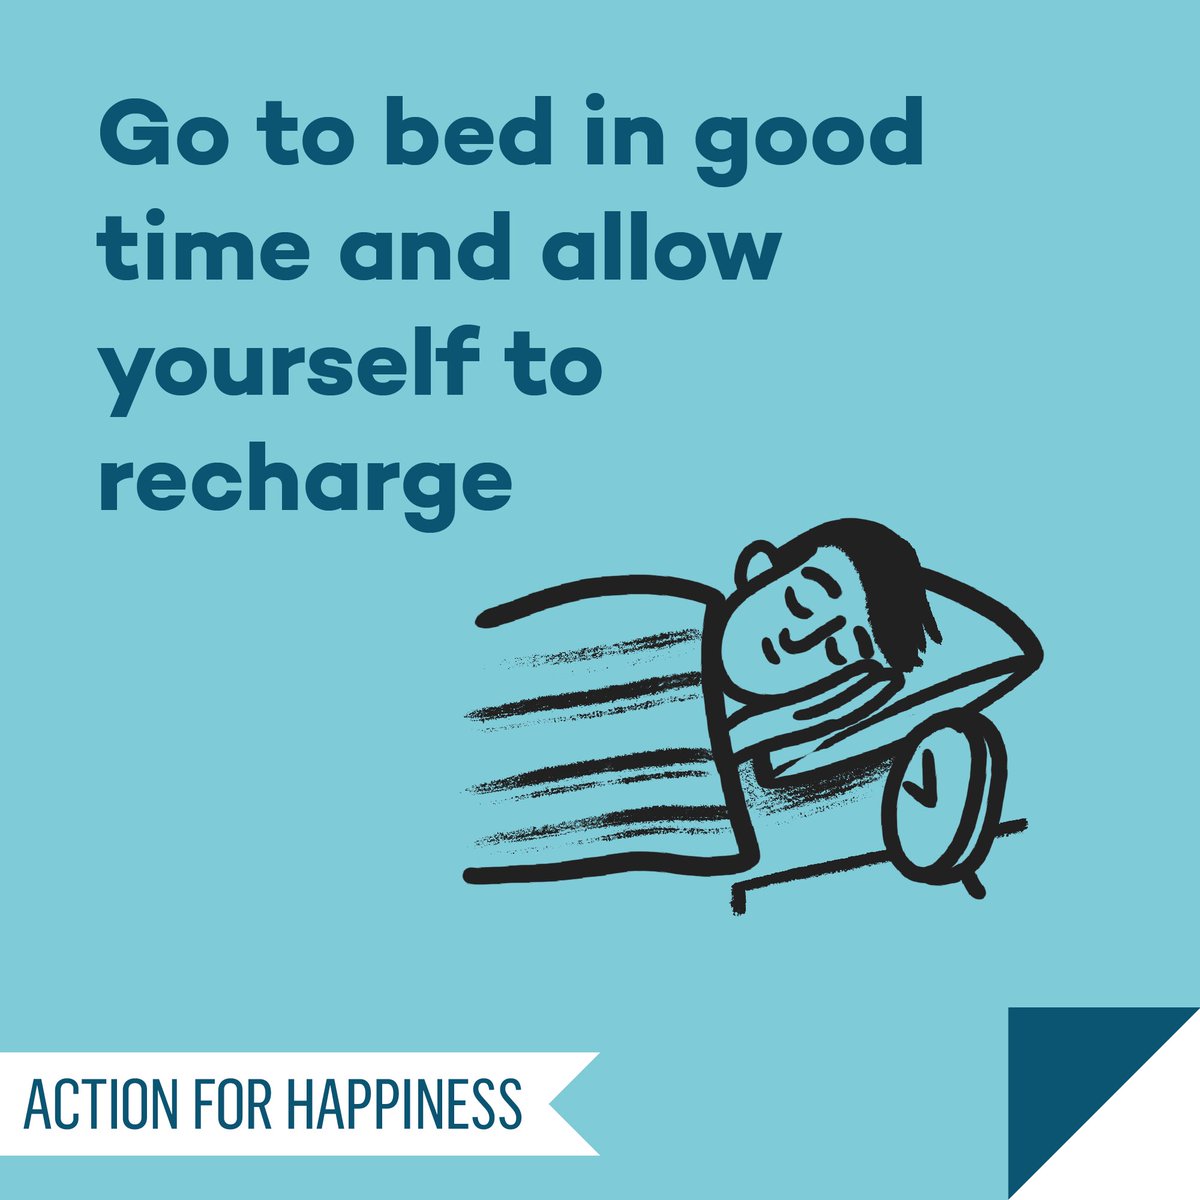 Happier January - Day 20: Go to bed in good time and allow yourself to recharge actionforhappiness.org/january #HappierJanuary